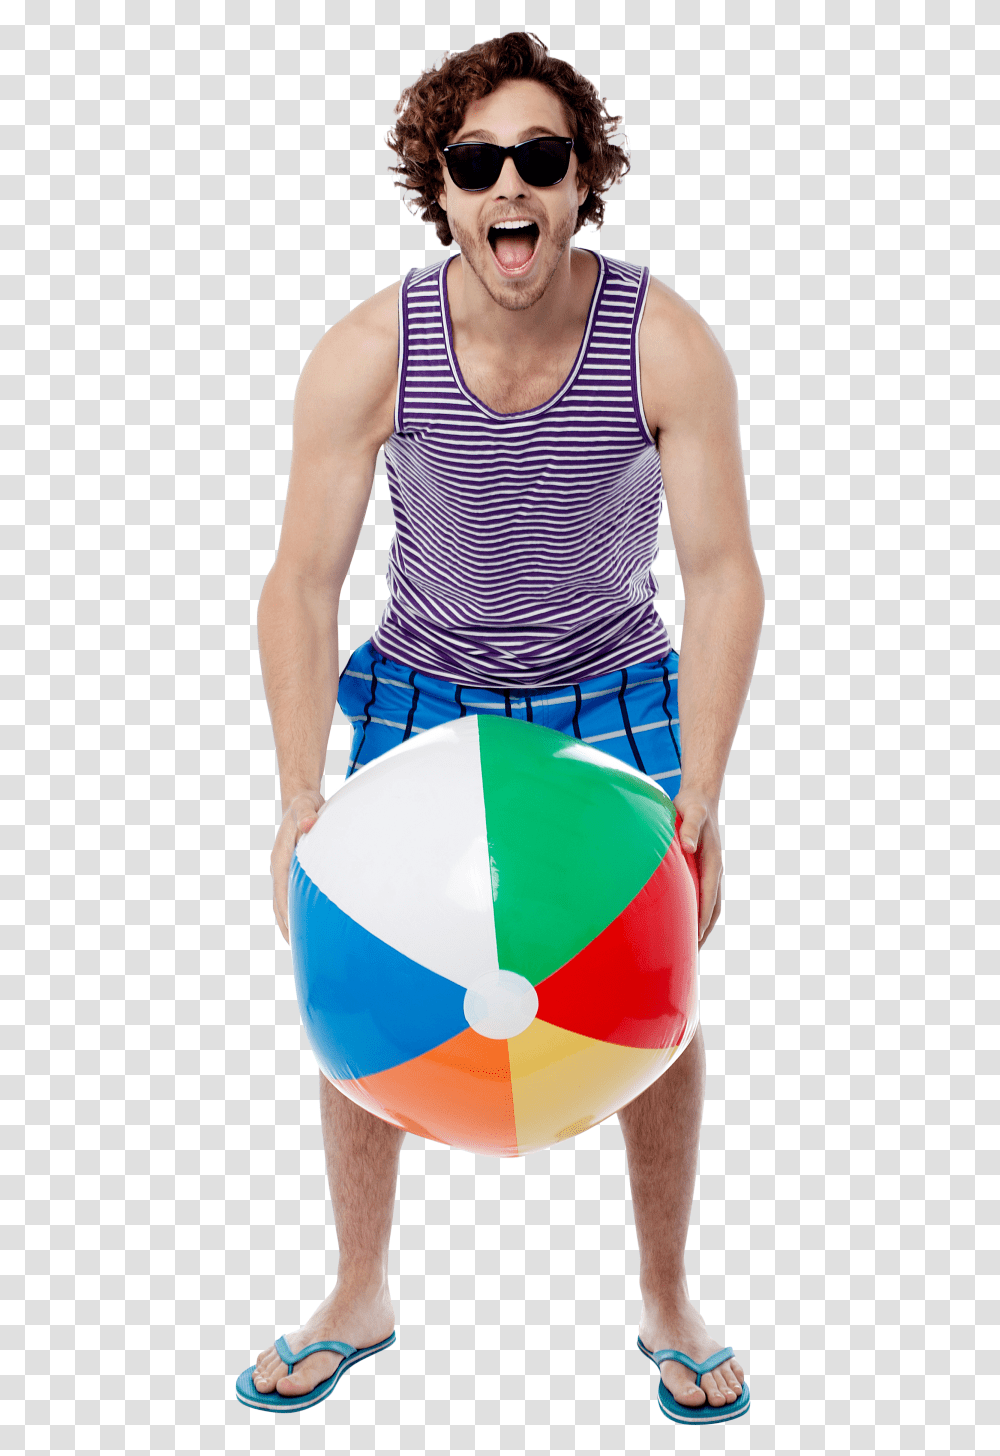 Men With Beach Ball Image, Person, Human, Sunglasses, Accessories Transparent Png